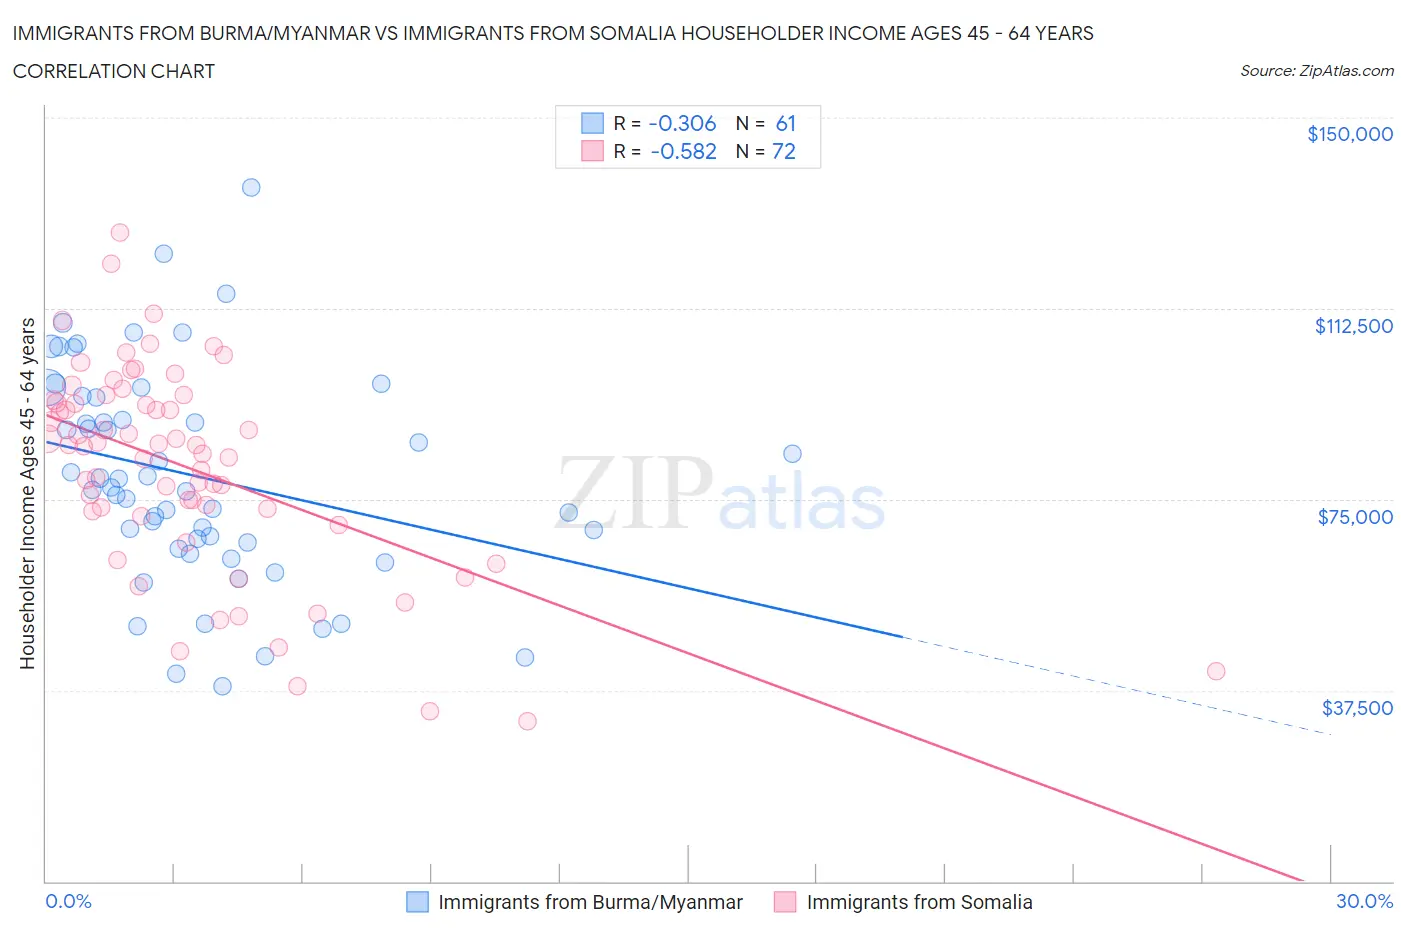 Immigrants from Burma/Myanmar vs Immigrants from Somalia Householder Income Ages 45 - 64 years